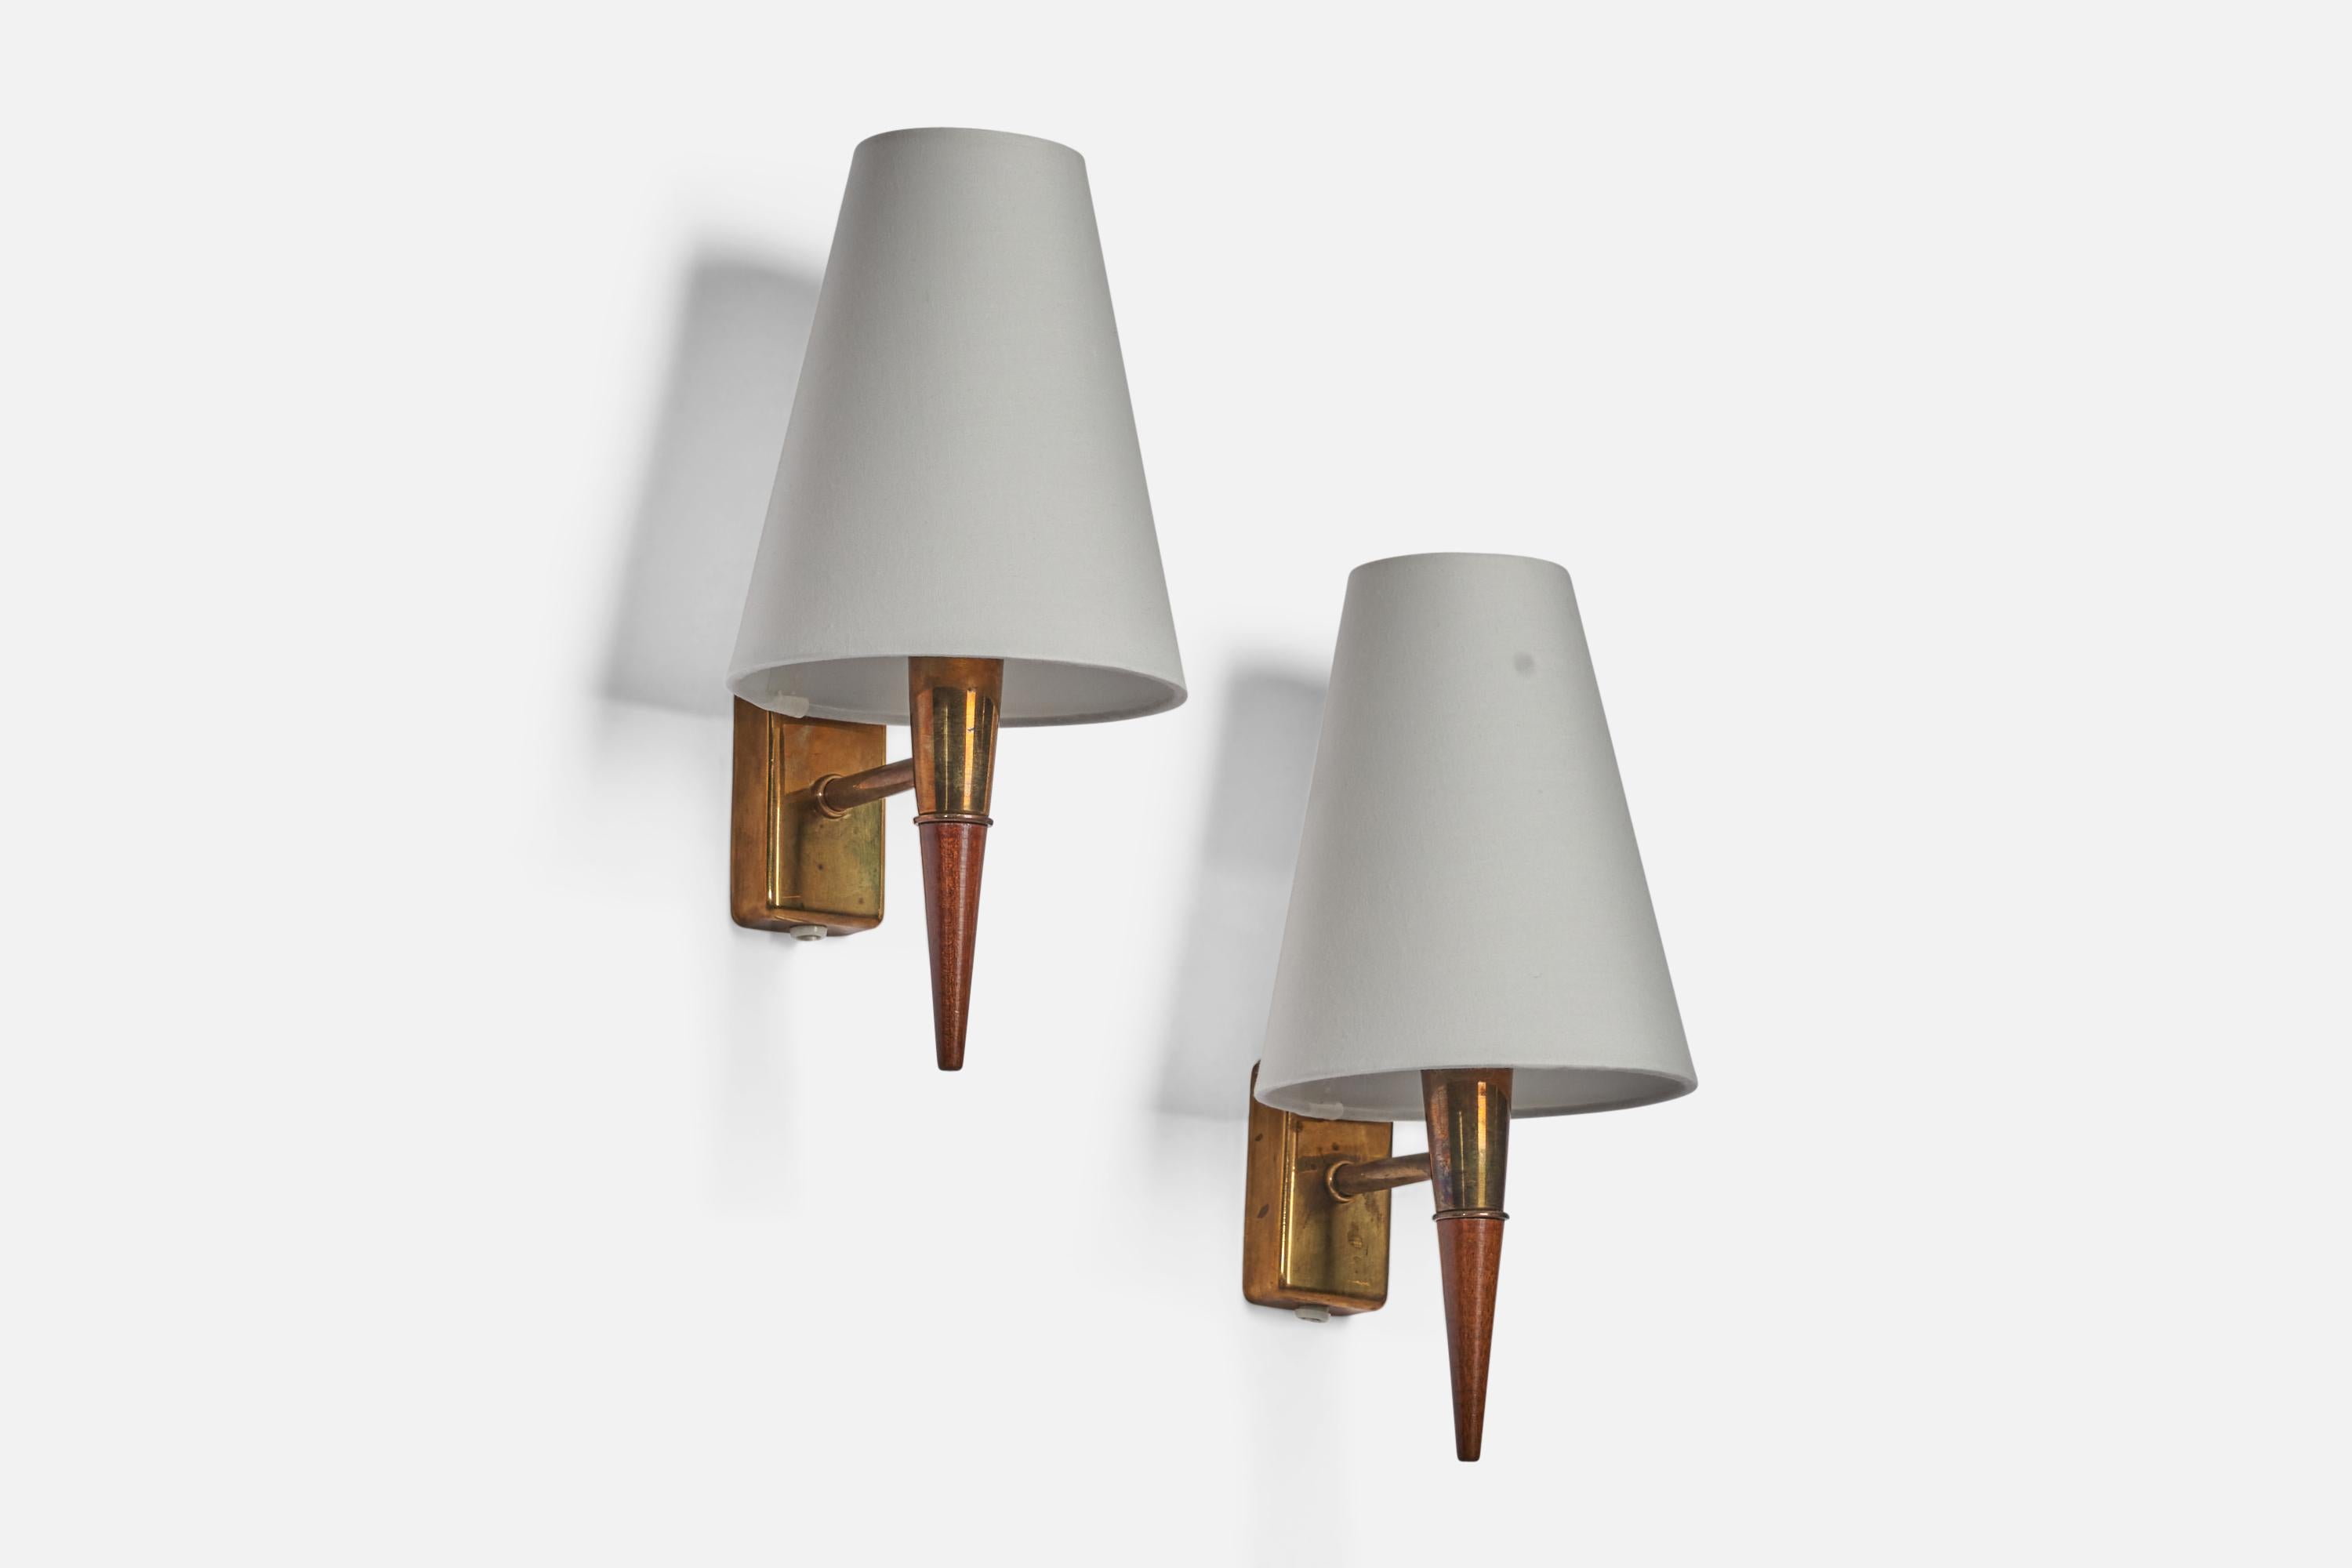 A pair of teak, brass and white fabric wall lights designed and produced in Sweden, 1950s.

Overall Dimensions (inches): 11.75” H x 5.5” W x 6.5” D
Back Plate Dimensions (inches): 3.15” H x 1.75” W x 0.8” D
Bulb Specifications: E-14 Bulb
Number of